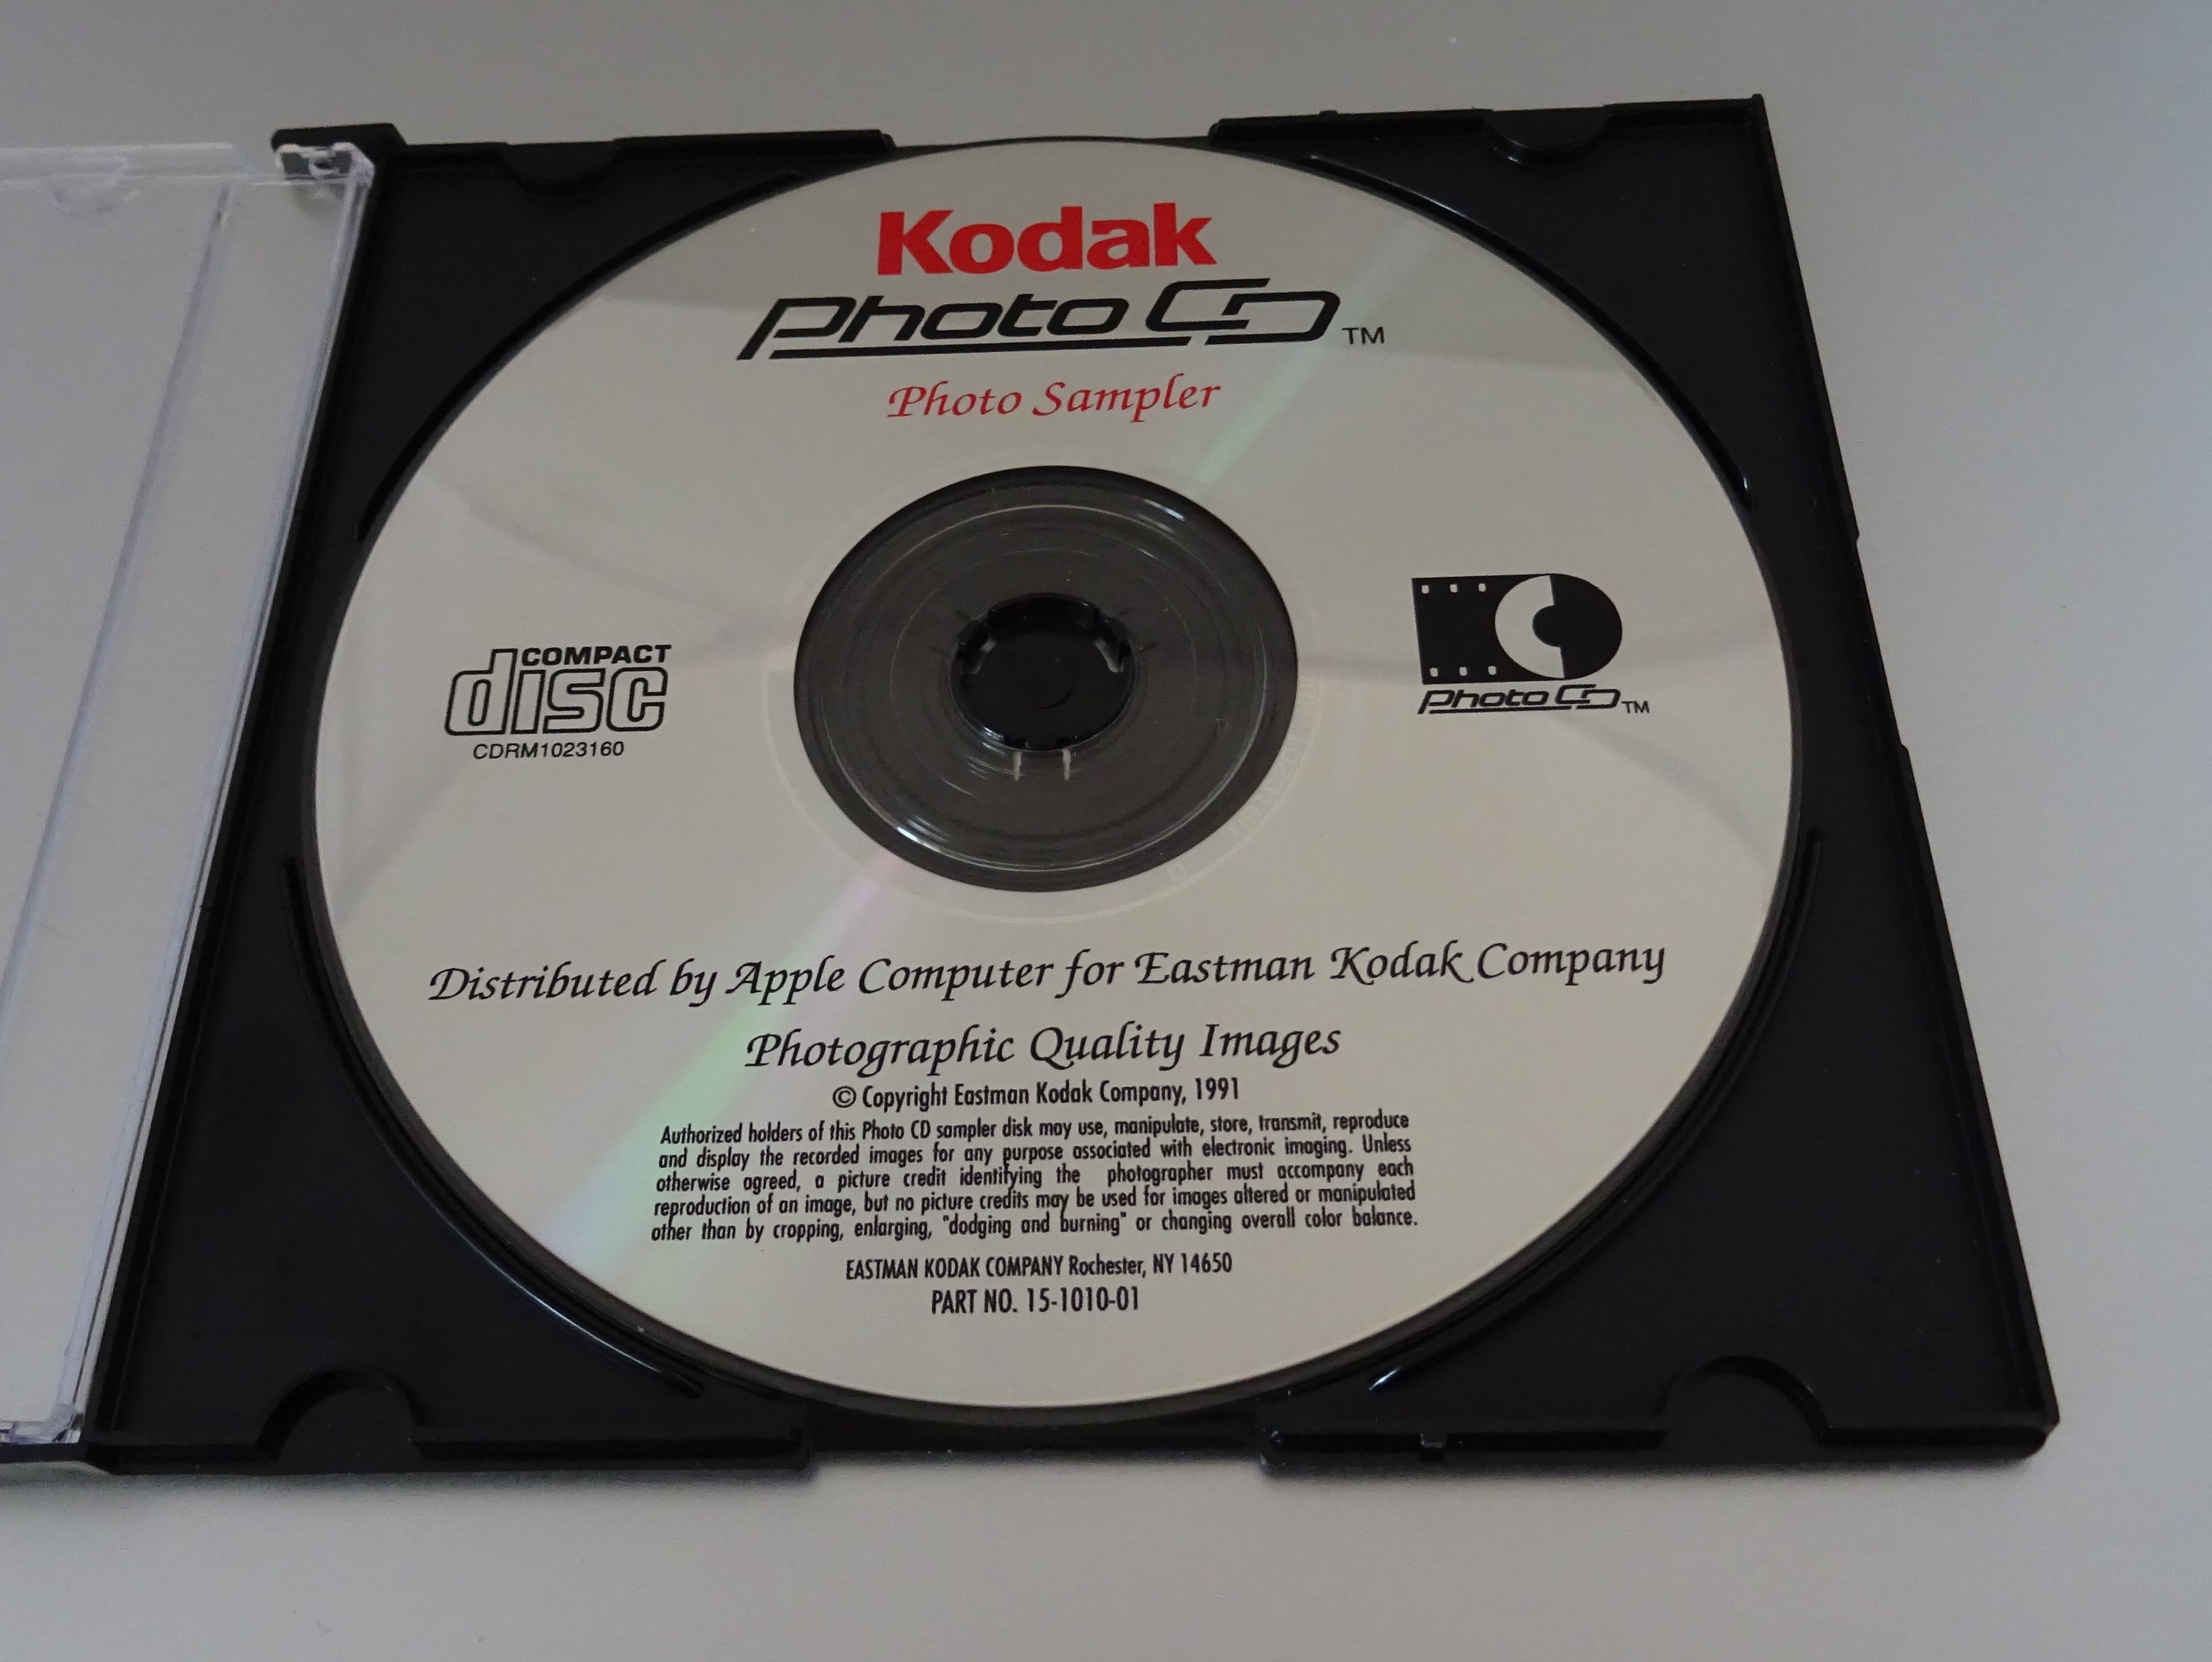 6 2 с 3 d cd. \D\CD. Азъ CD. С³d-CD-(2c³d³-CD). CD DJ tihs 2000 1997 год.